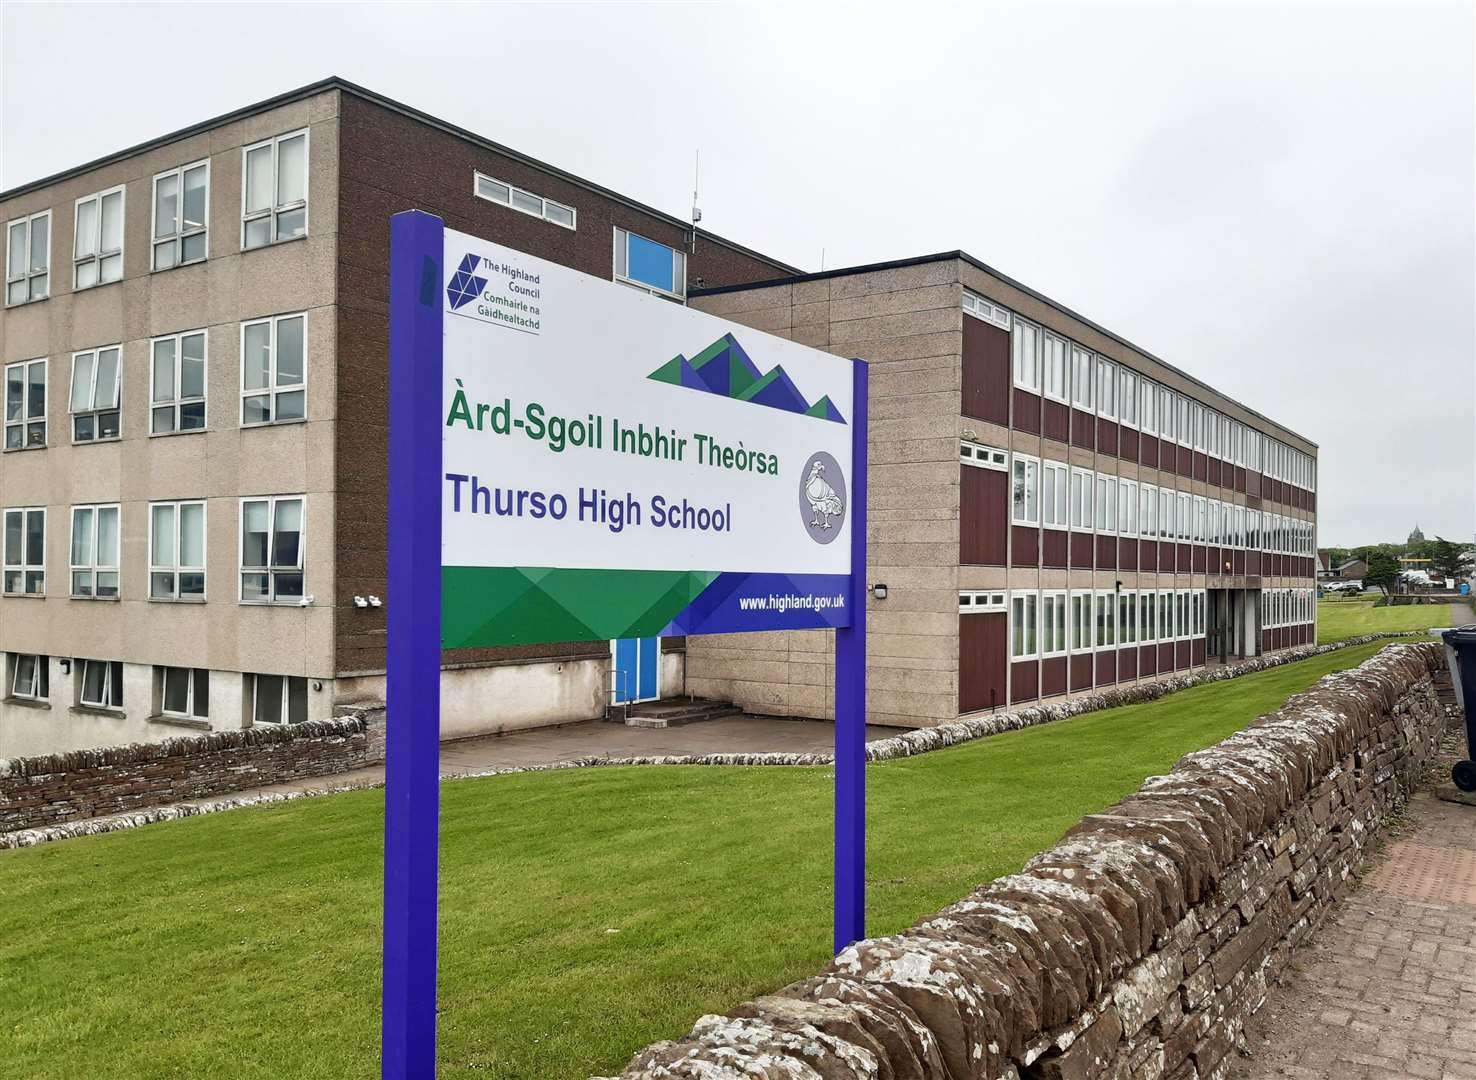 Matthew Reiss outlined a series of problems affecting parts of Thurso High School.